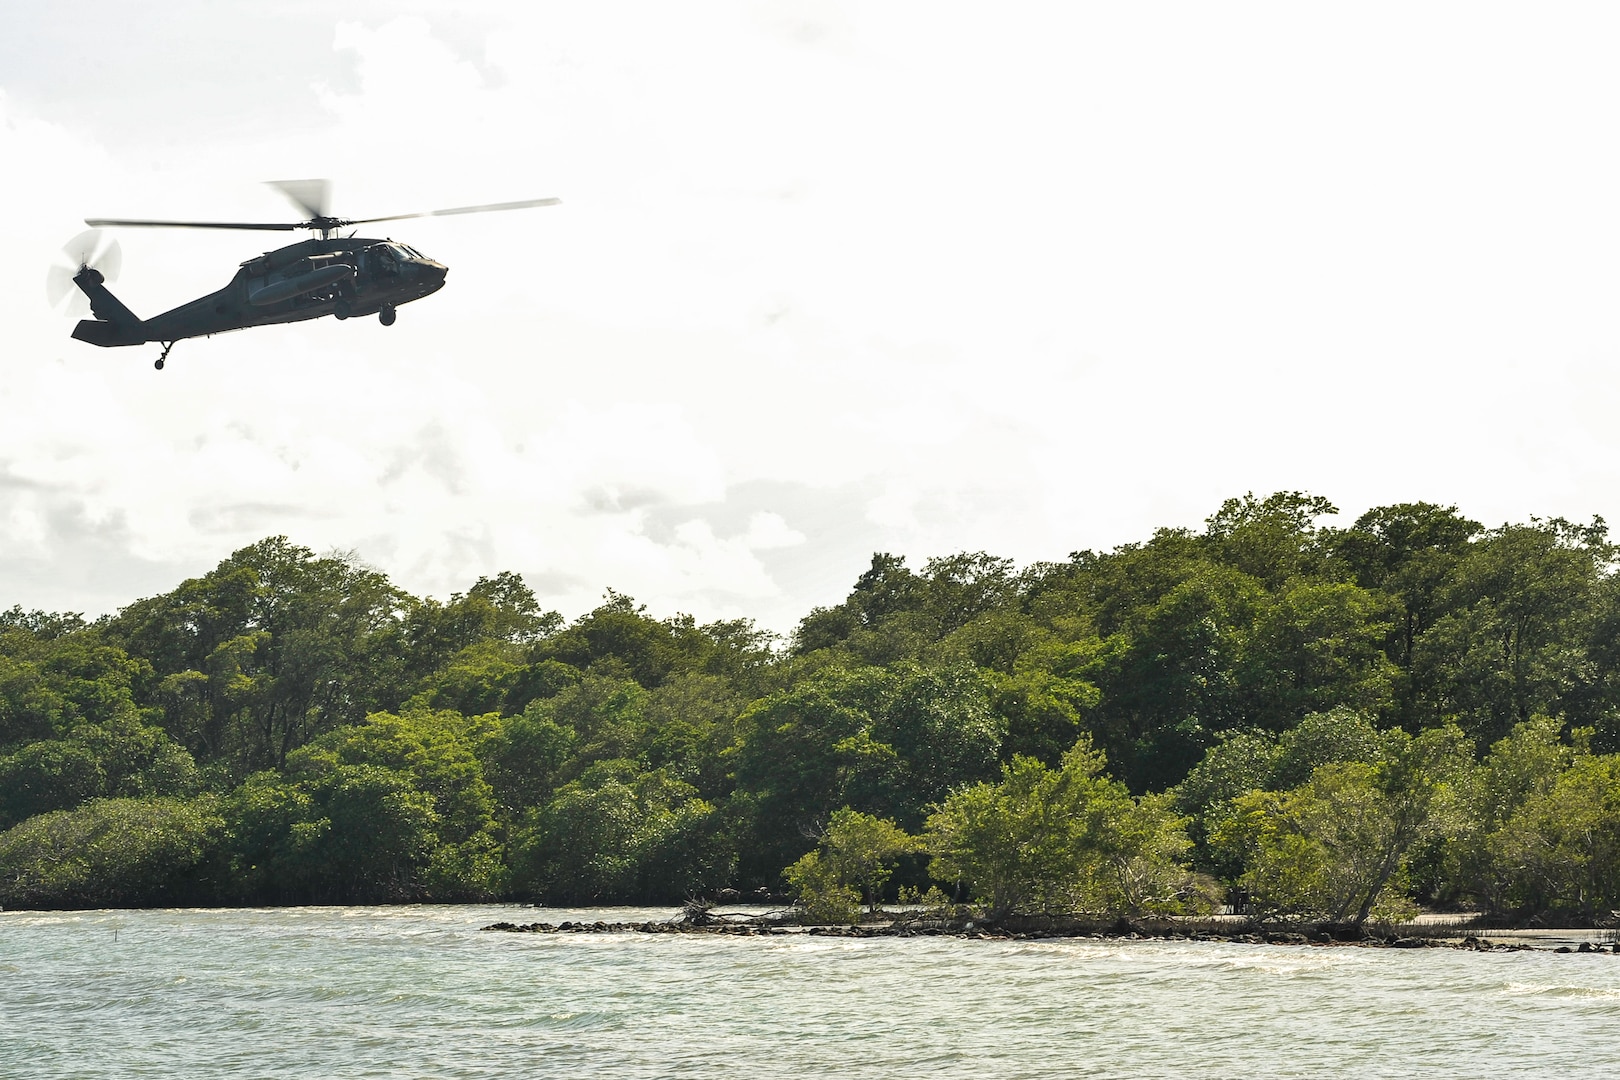 A UH-60 Black Hawk assigned to Joint Task Force-Bravo’s 1st Battalion, 228th Aviation Regiment approaches an extraction point during training in Belize District, July 21, 2016. As the only forward deployed aviation assets in the U.S. Southern Command theater, the 1-228th AVN facilitates USSOUTHCOM’s Theater Engagement Strategy that includes building partner nation capacity to conduct counter-transnational organized crime operations. (U.S. Air Force photo by Staff Sgt. Siuta B. Ika)